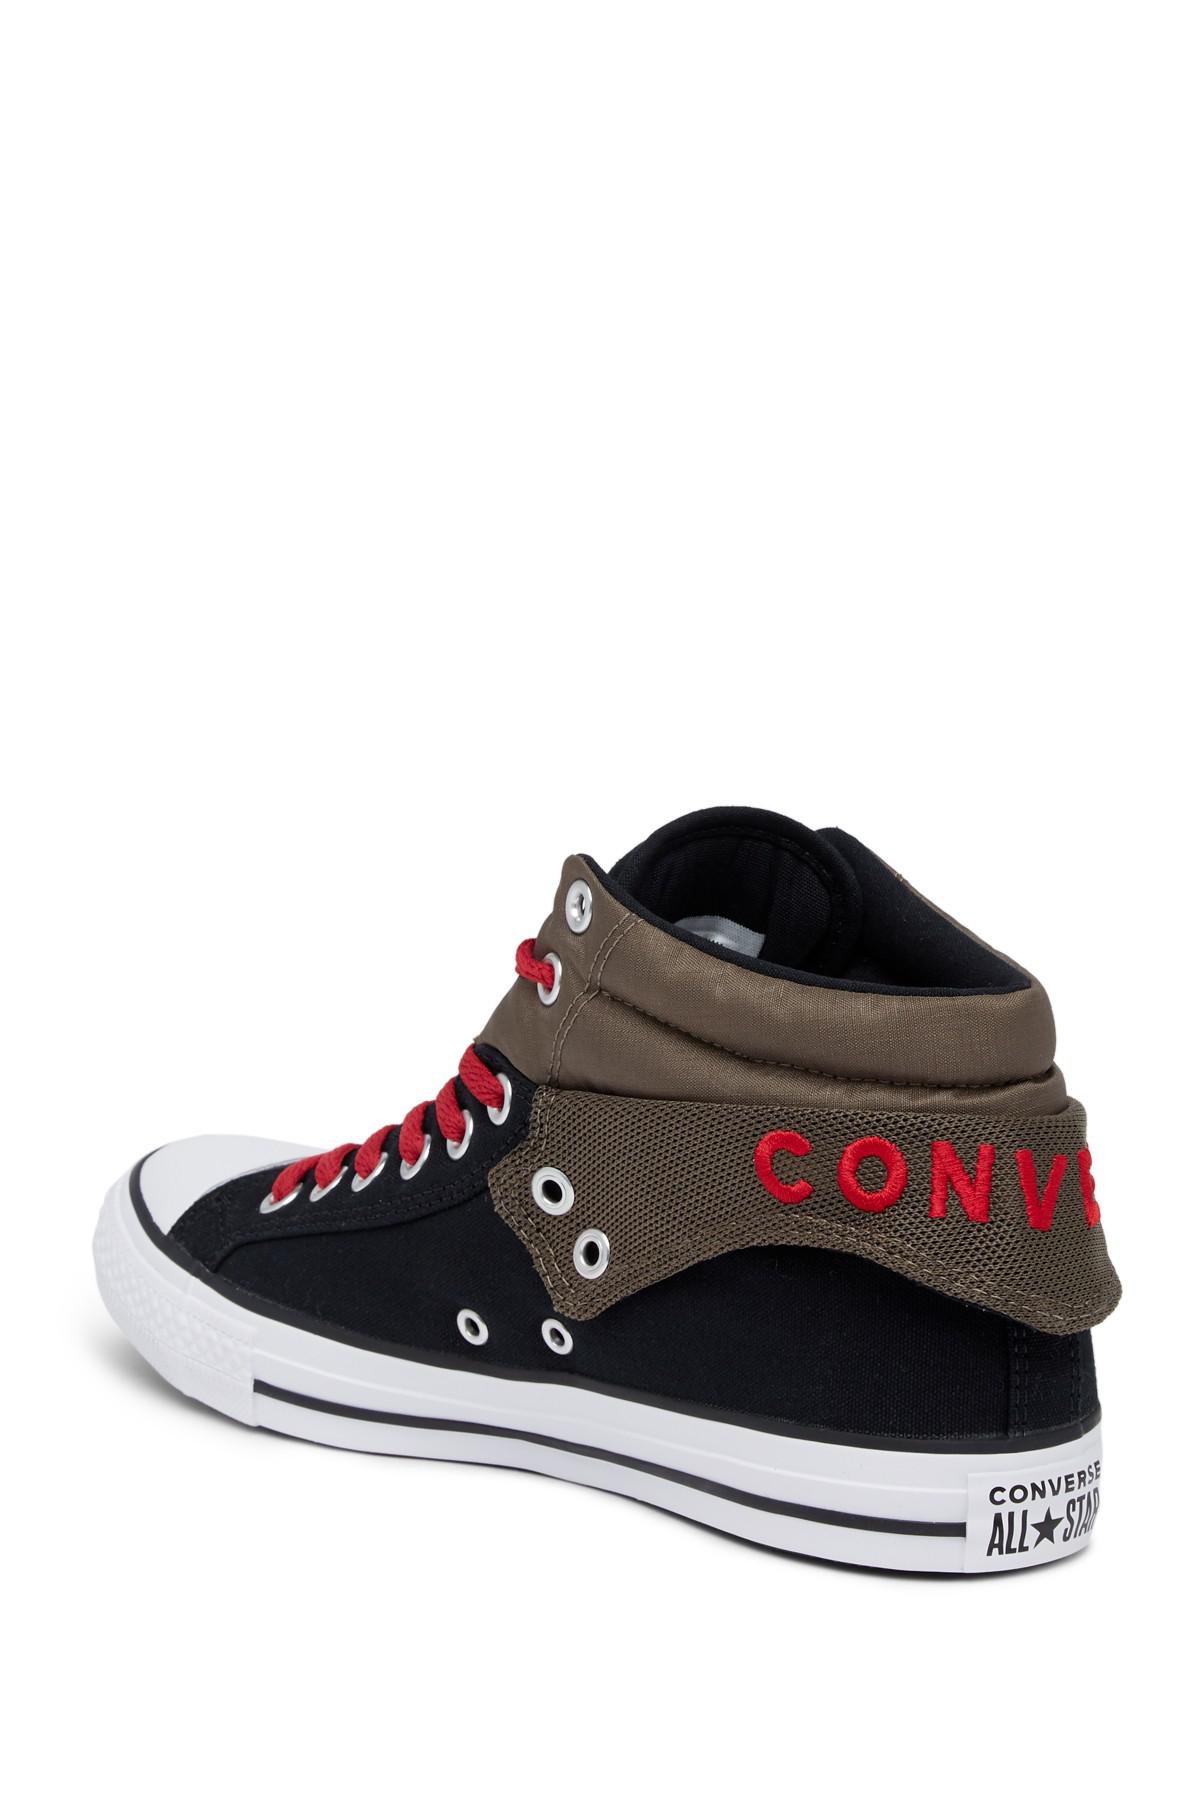 Converse Canvas Chuck Taylor Pc2 Mid Sneaker in Black/Charcoal (Black) for  Men | Lyst